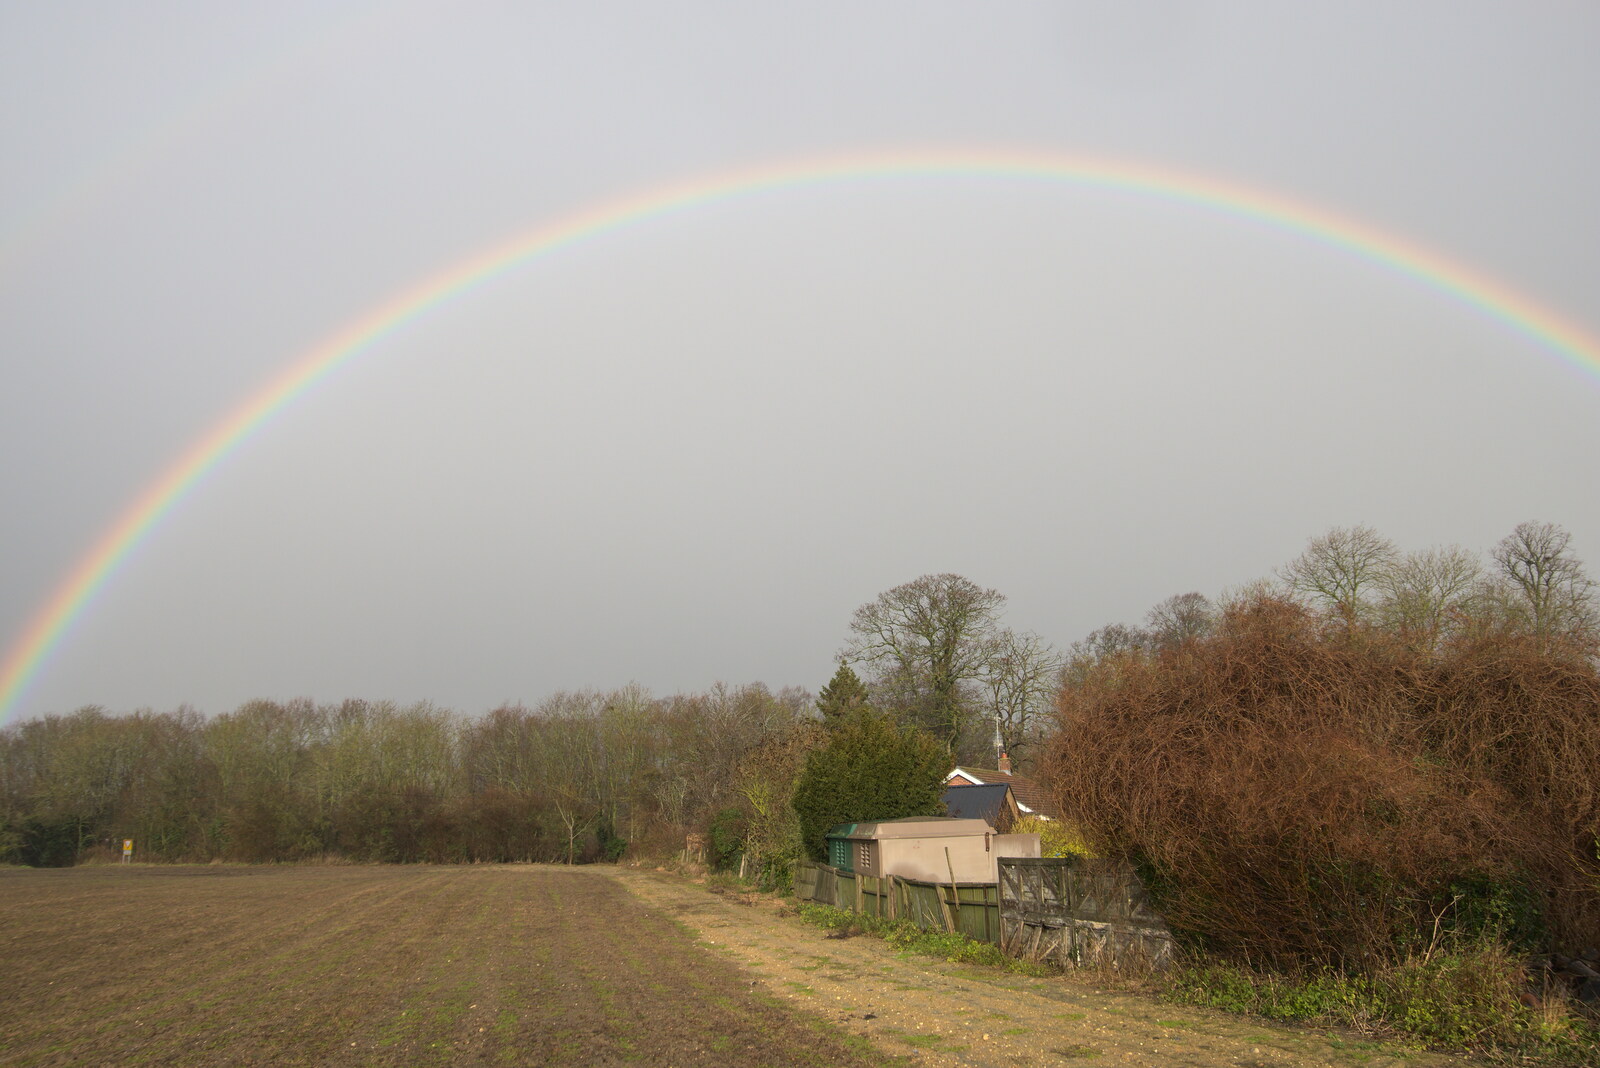 A rainbow over the side field from New Year's Day, Brome, Suffolk - 1st January 2022